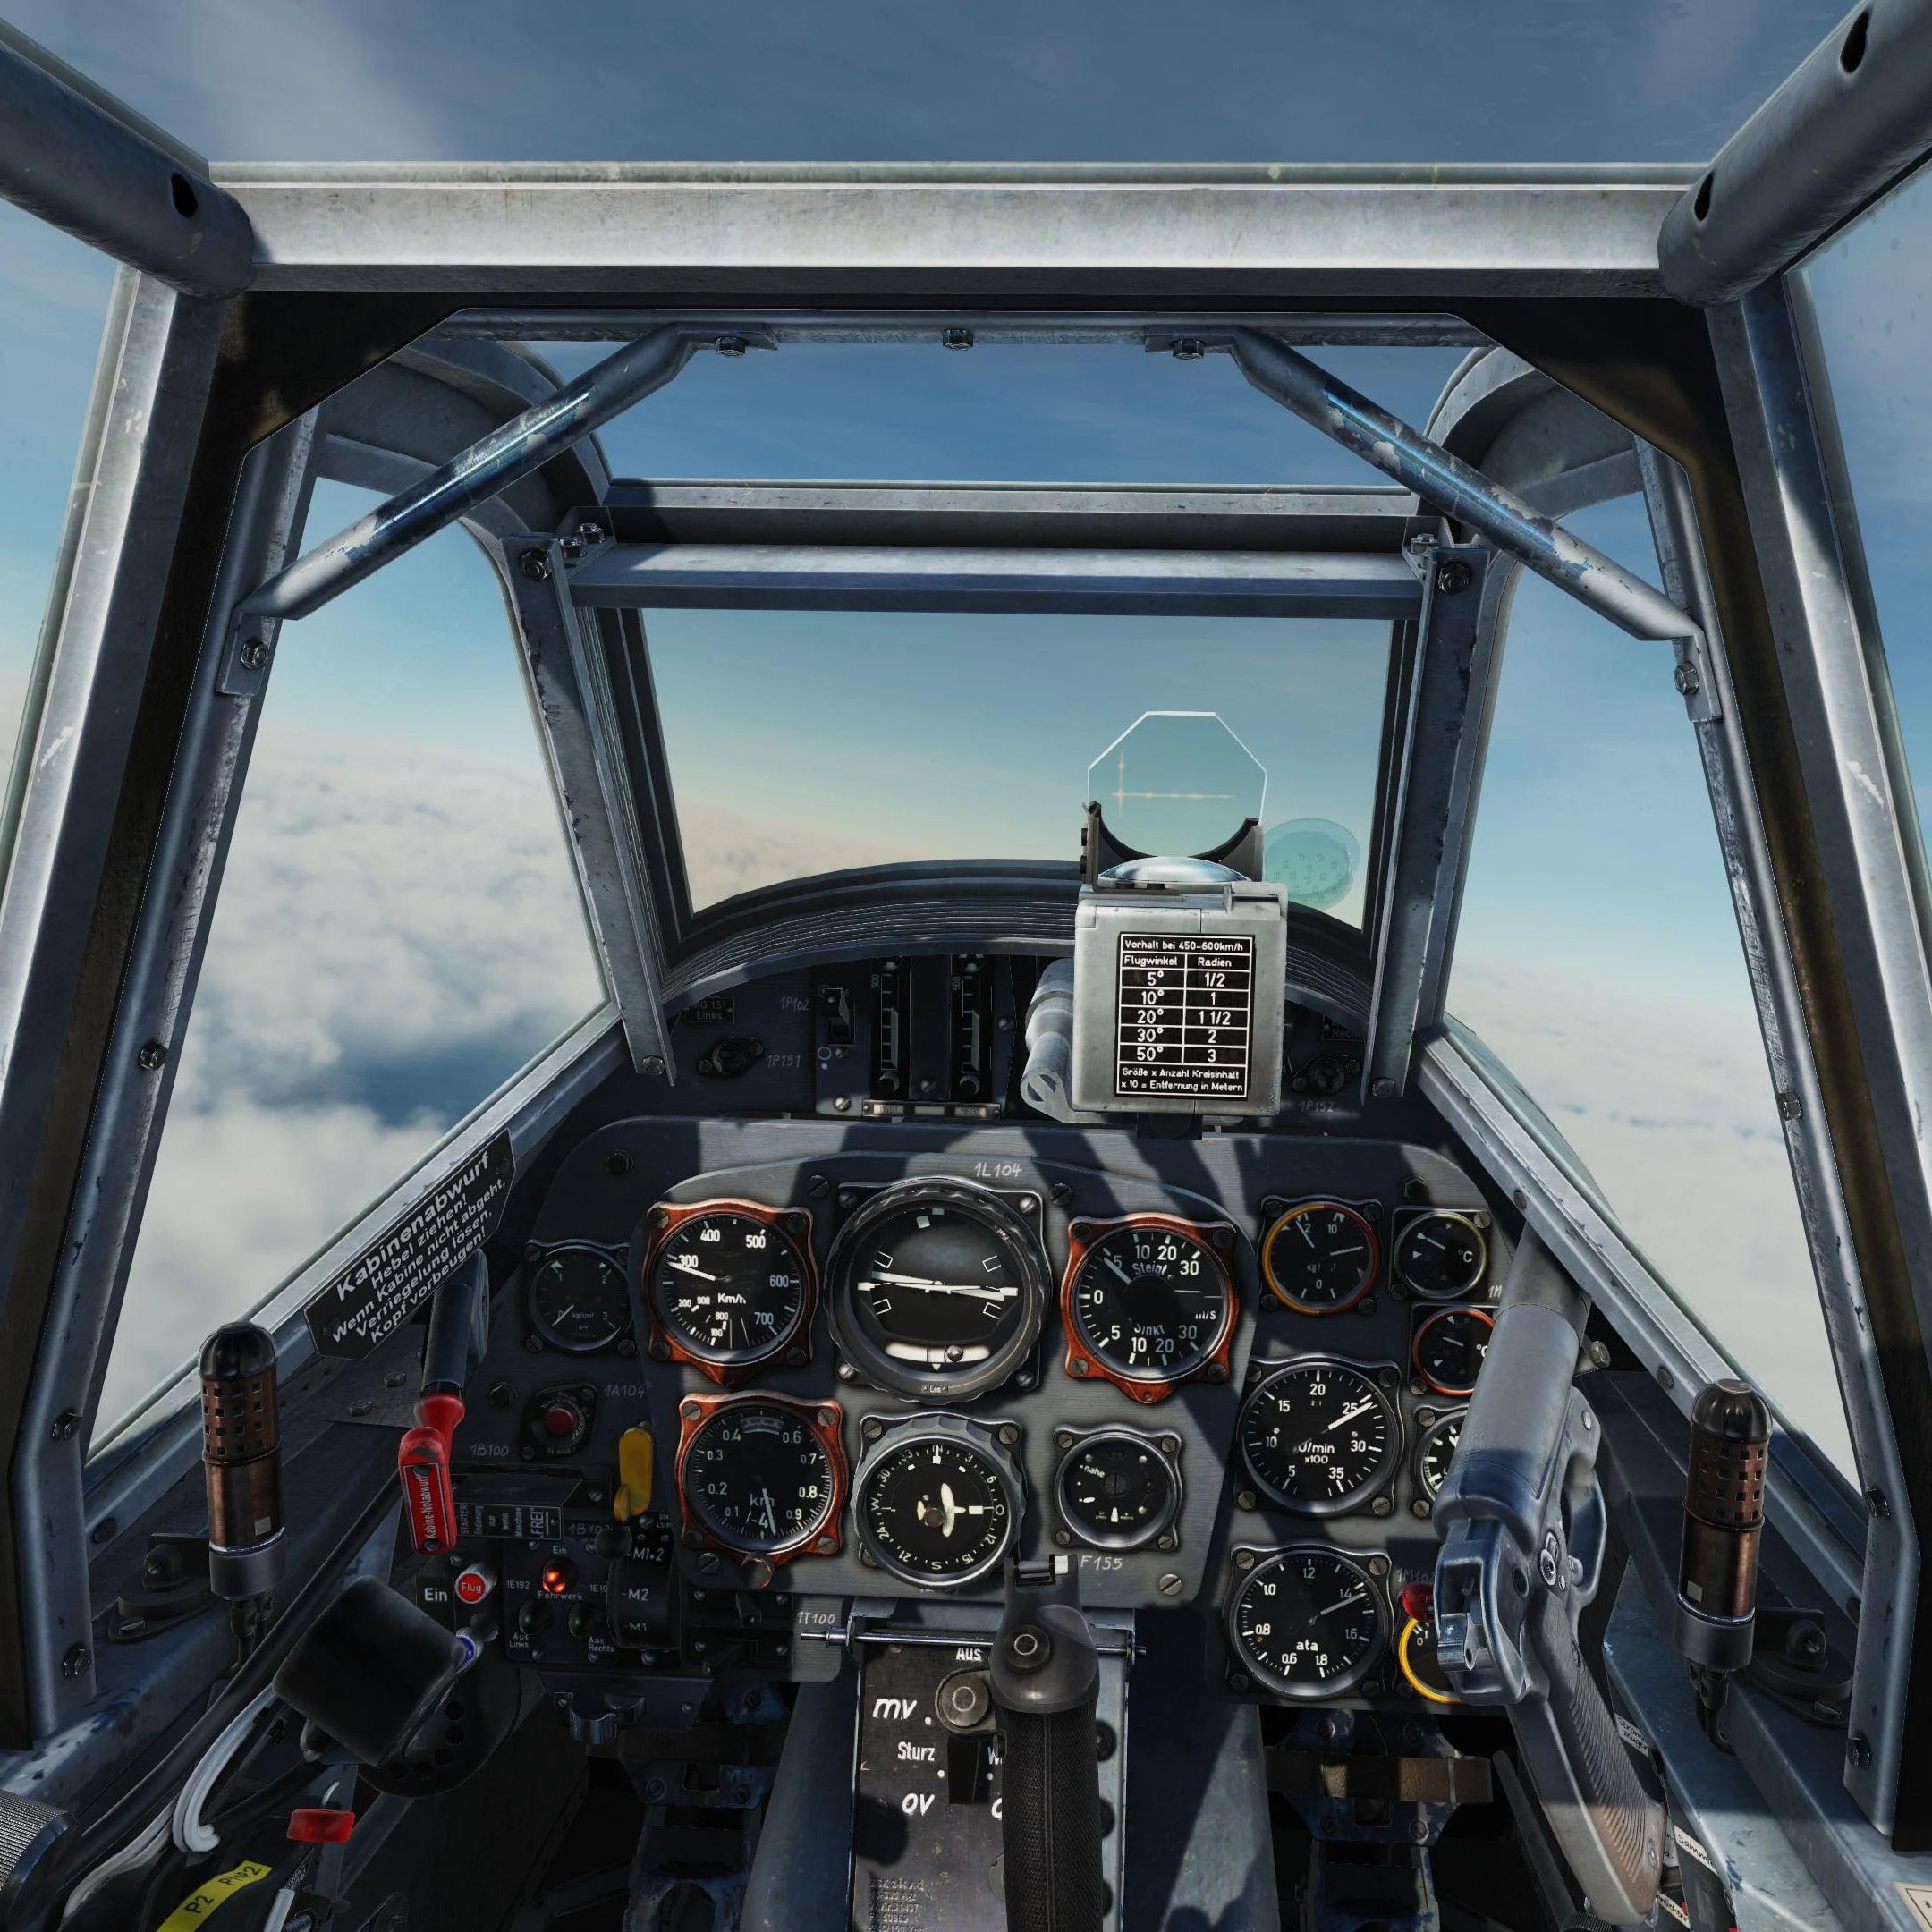 Pato's BF109k4 Cockpit Mod with reworked instruments